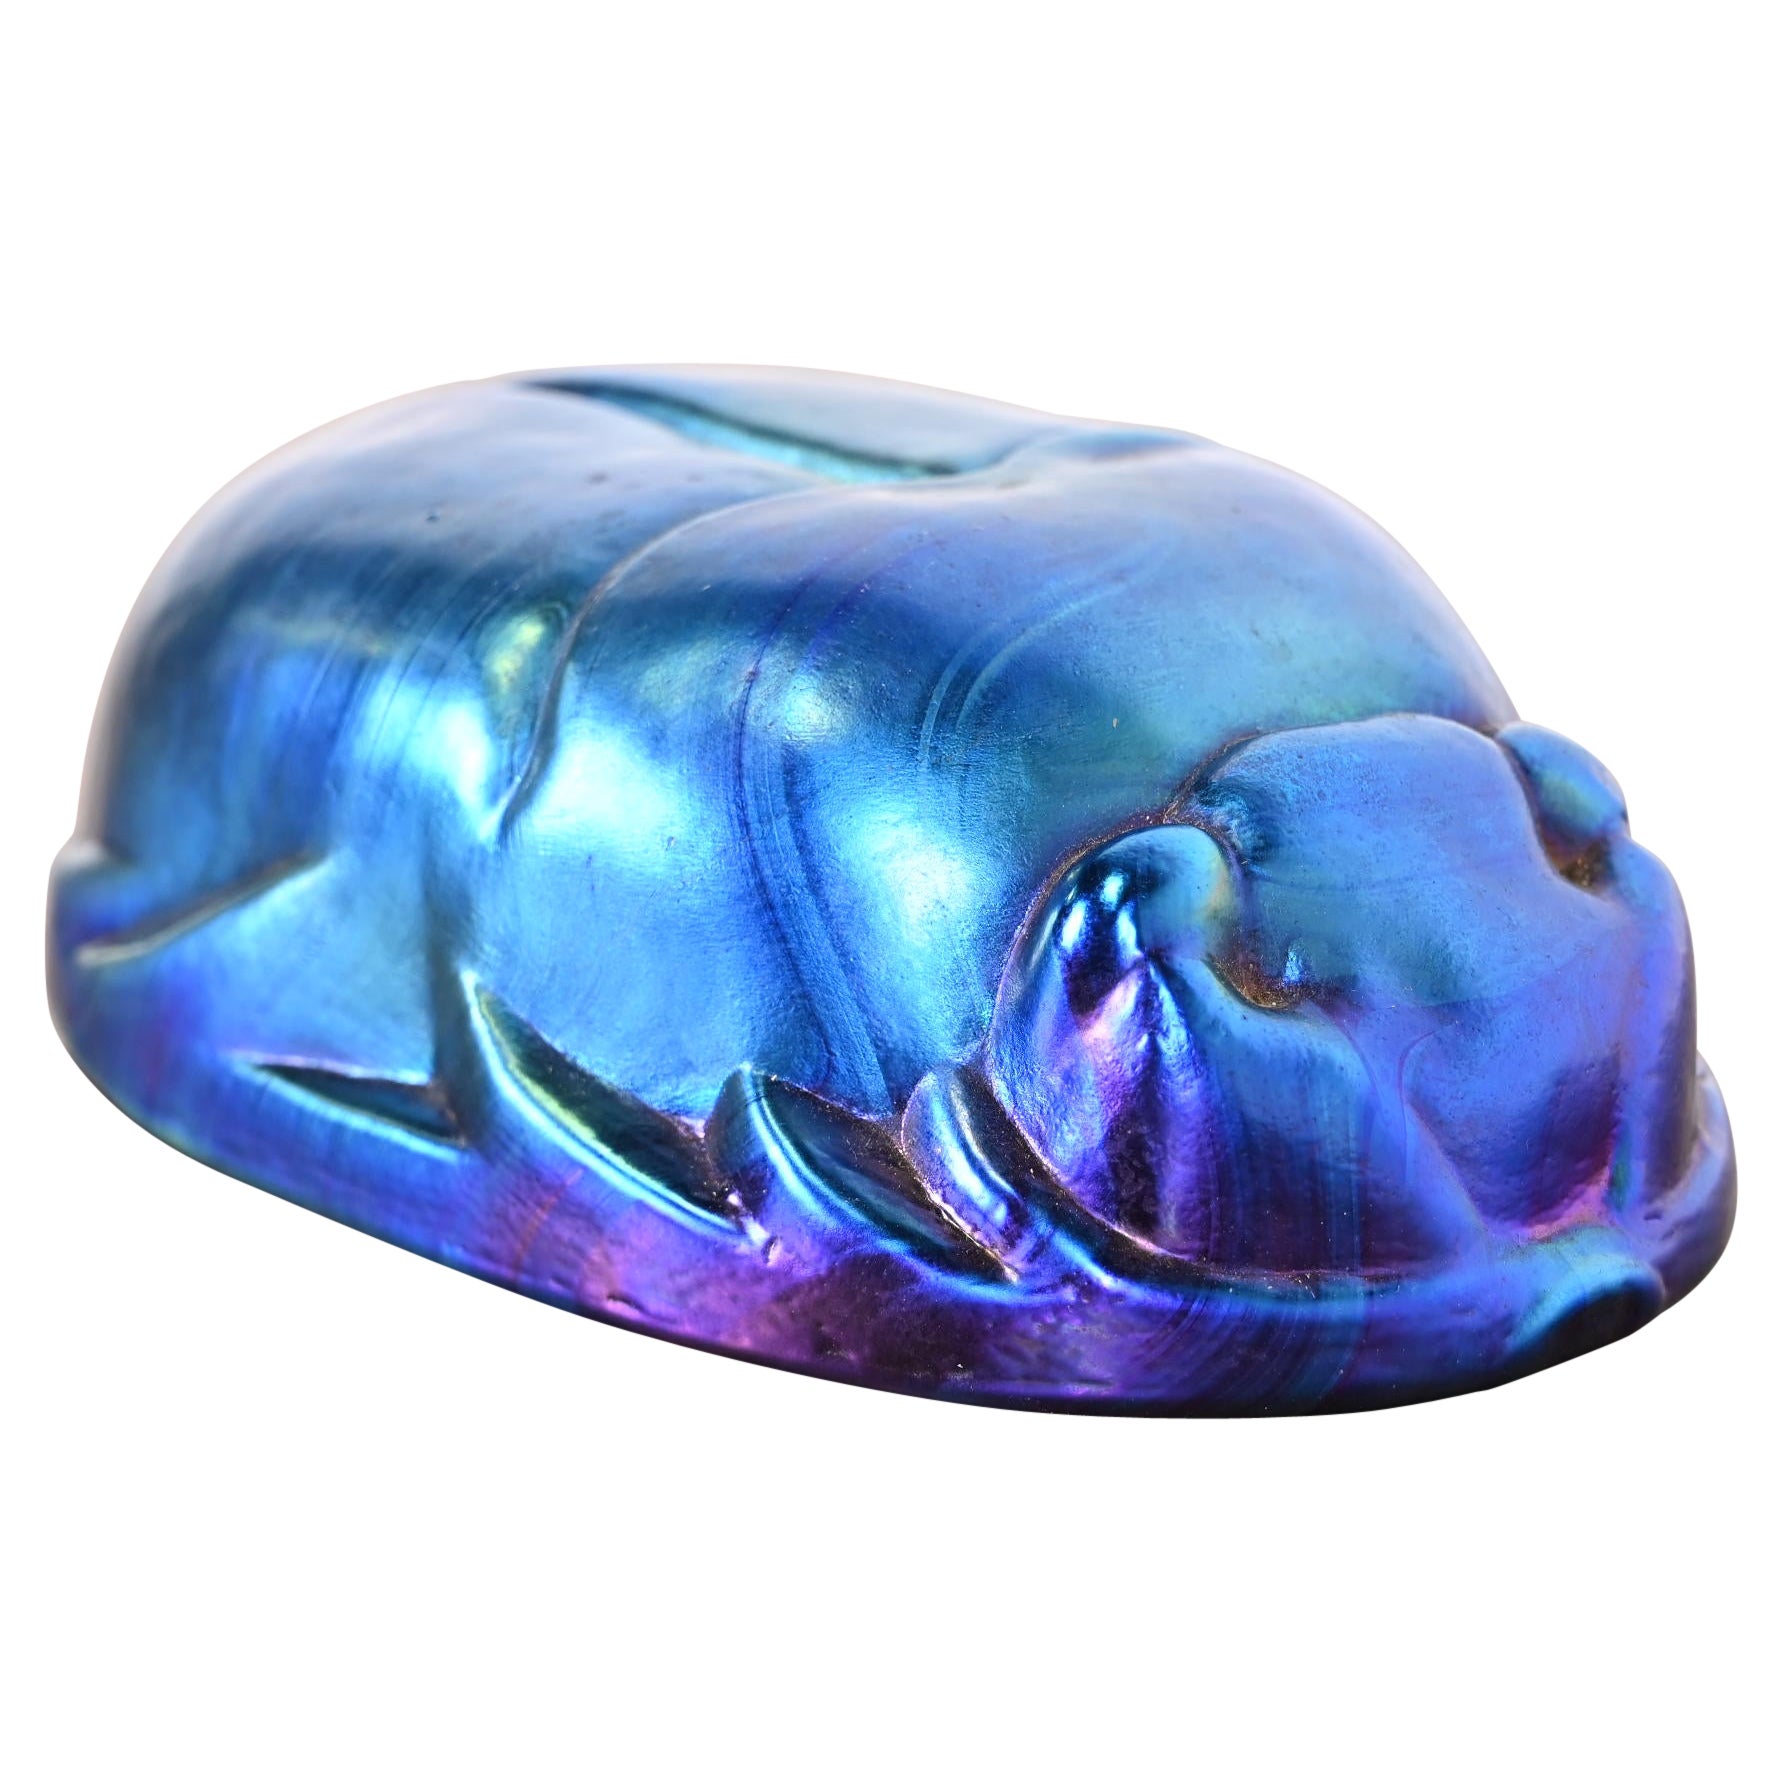 Tiffany Studios Style Iridescent Favrile Glass Scarab Paperweight